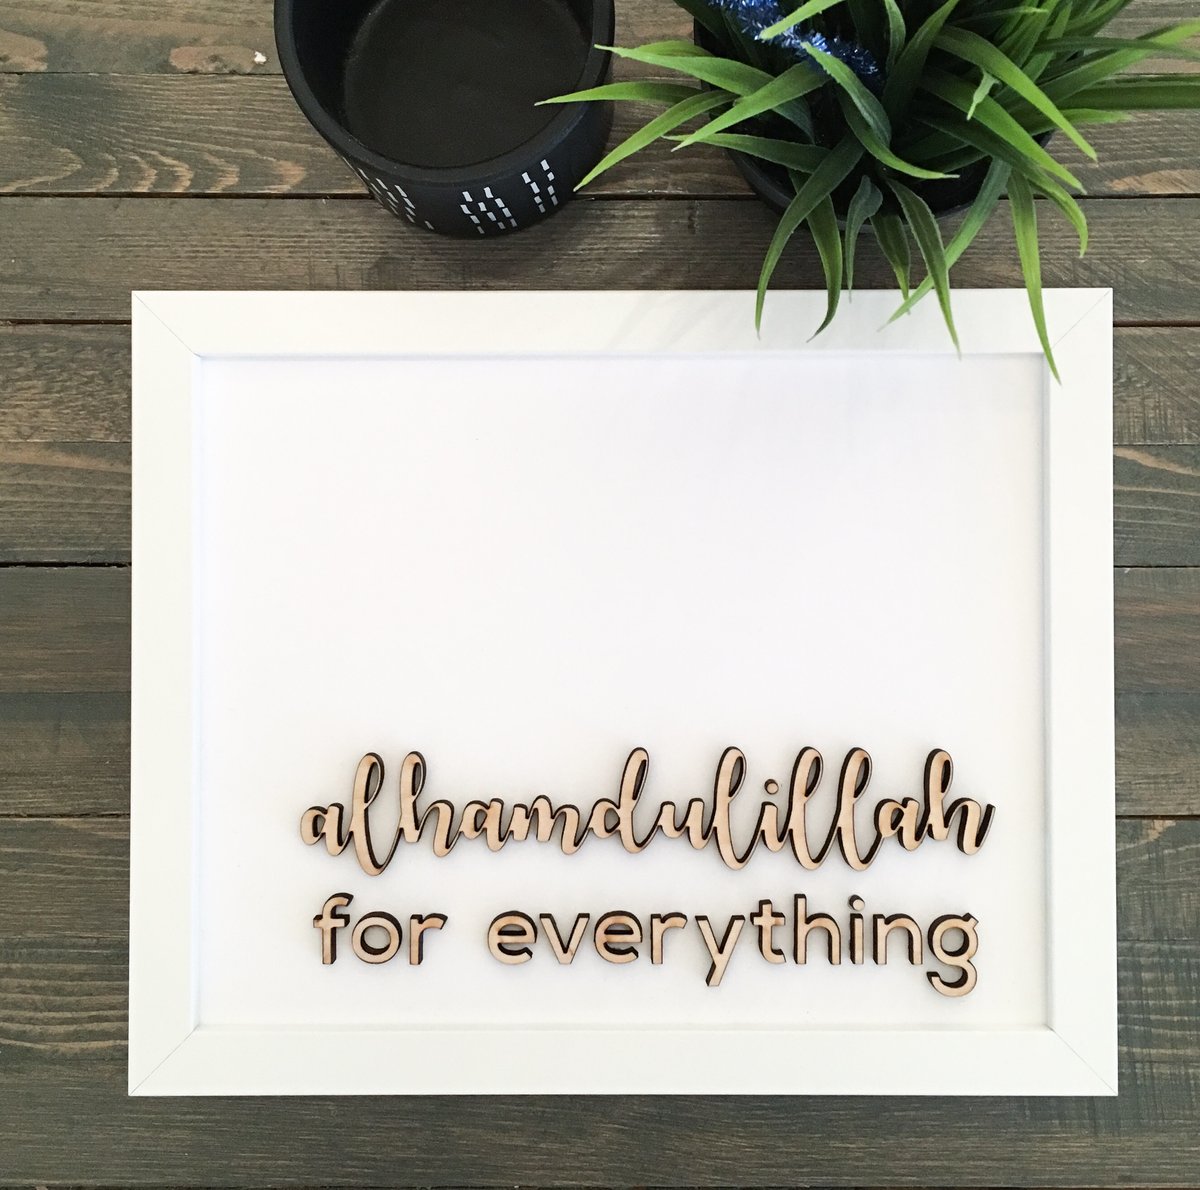 Image of alhamdulillah for everything - 8x10